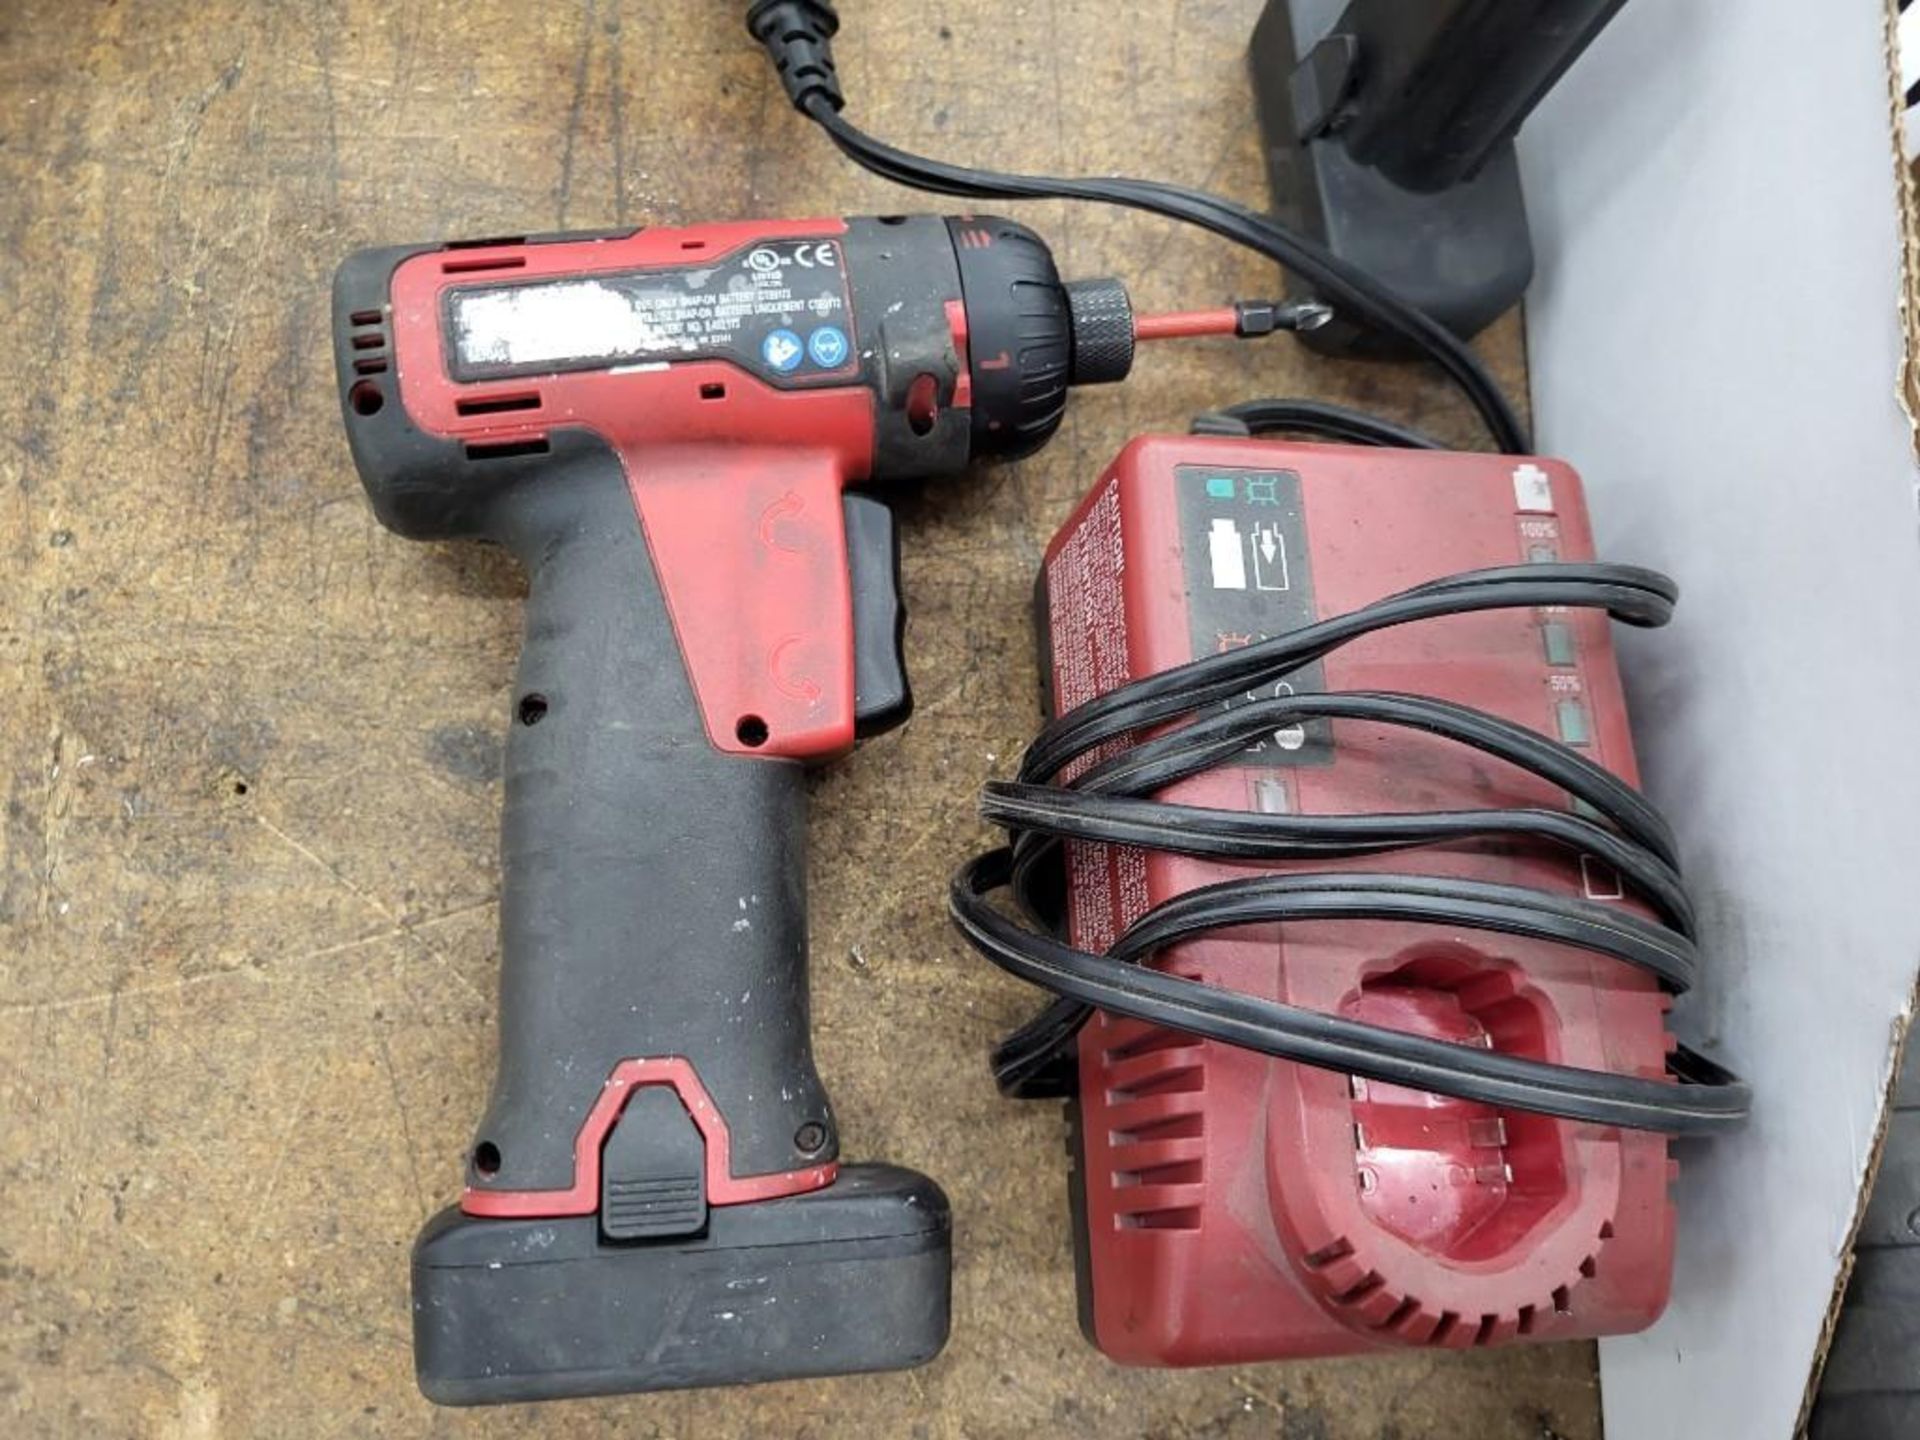 LOT OF SNAP-ON CORDLESS DRILLS AND DRIVERS. WITH CHARGER AND BATTERIES - Image 5 of 6